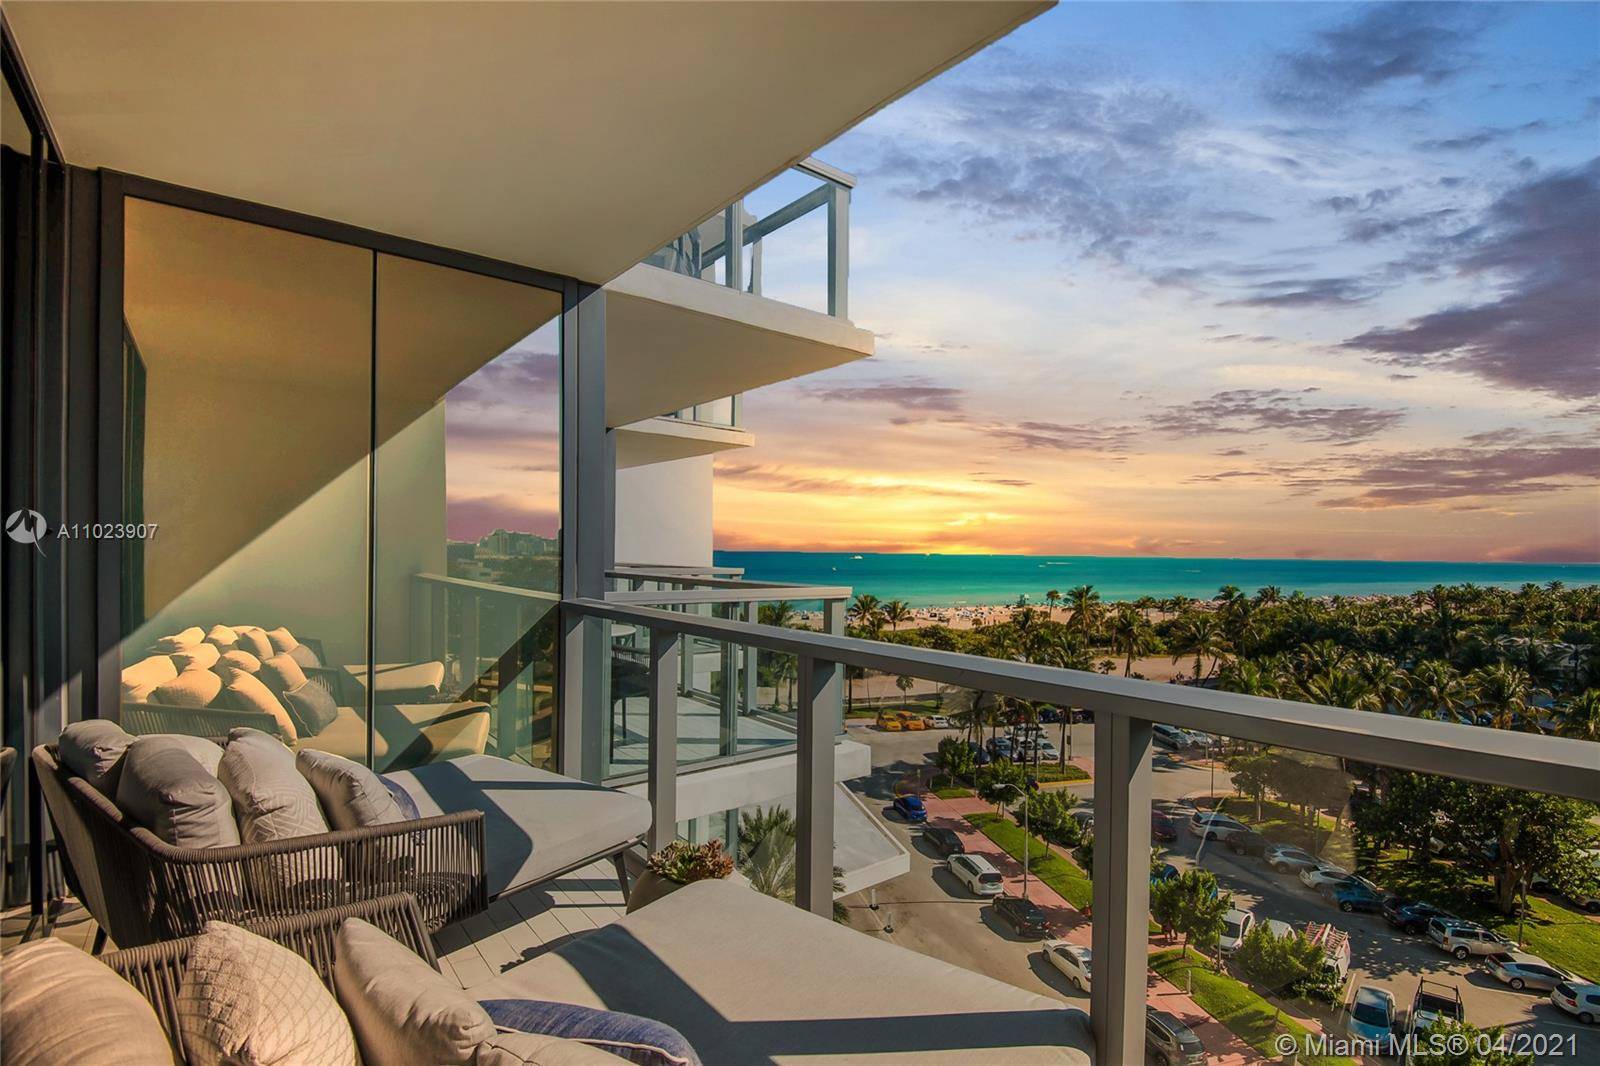 Southeast almost direct ocean views from this highly sought after 2 den converted to bedroom complete with world class hotel service and amenities, fabulous restaurants, incredible pool cabanas, beach club, ...